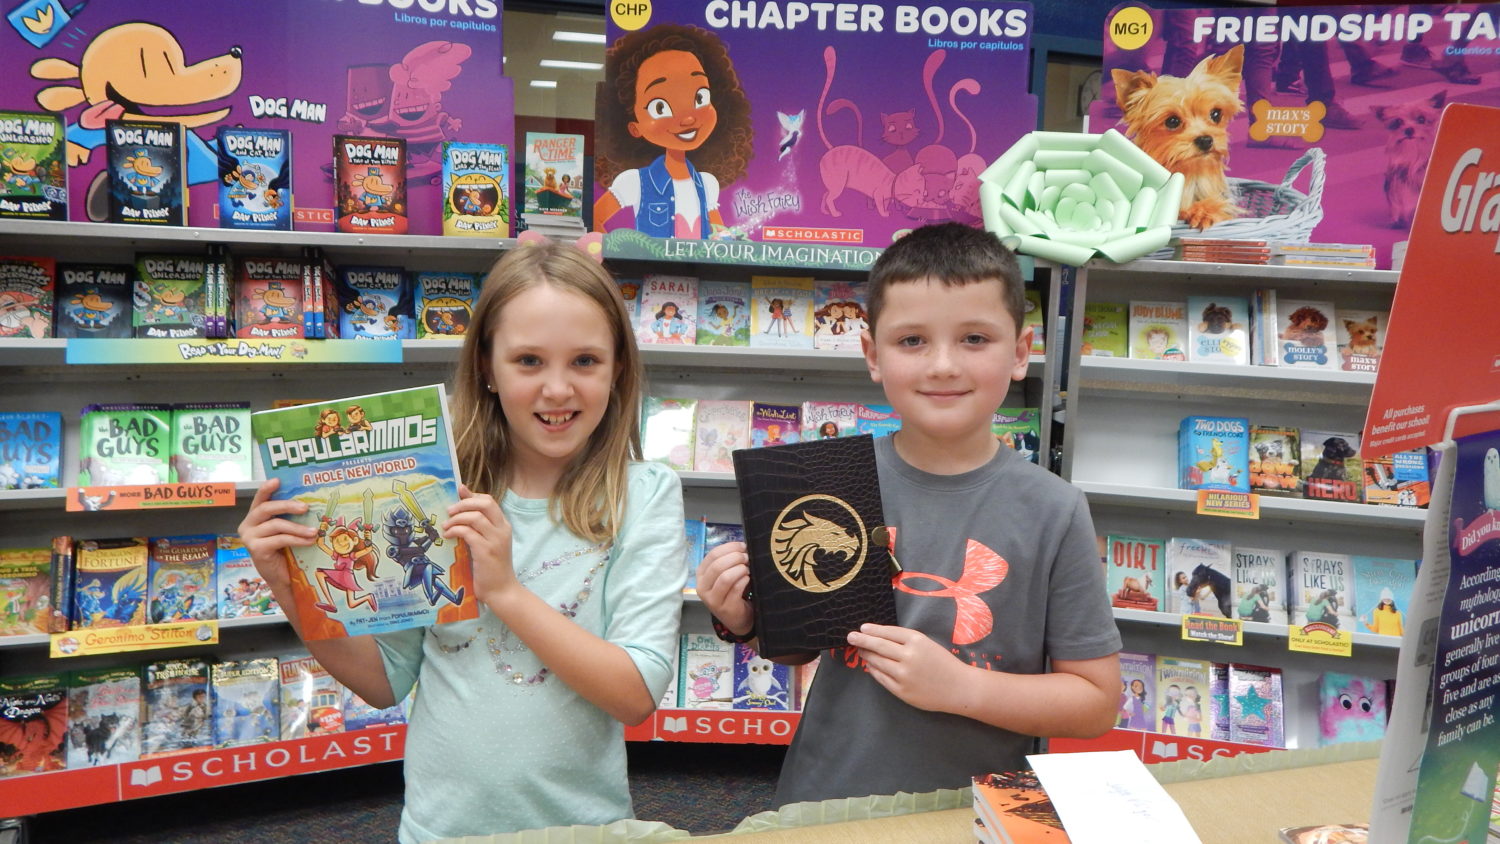 "two students hold up books from the book fair"